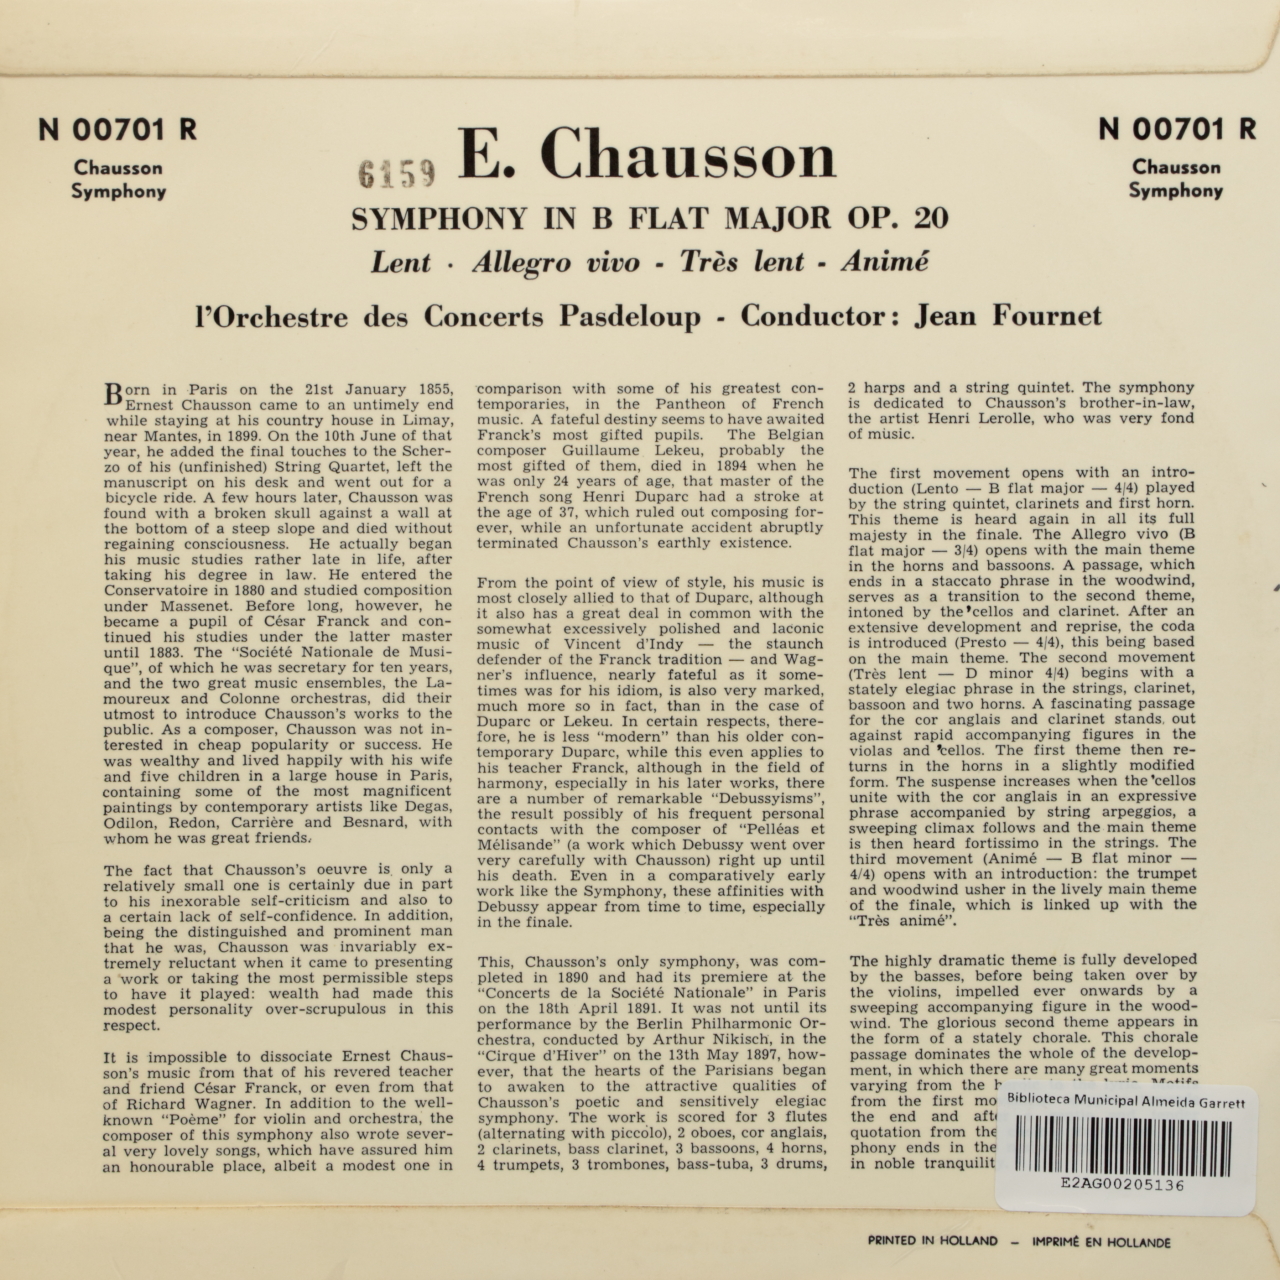 Chausson: Symphony in B Flat Major Opus 20